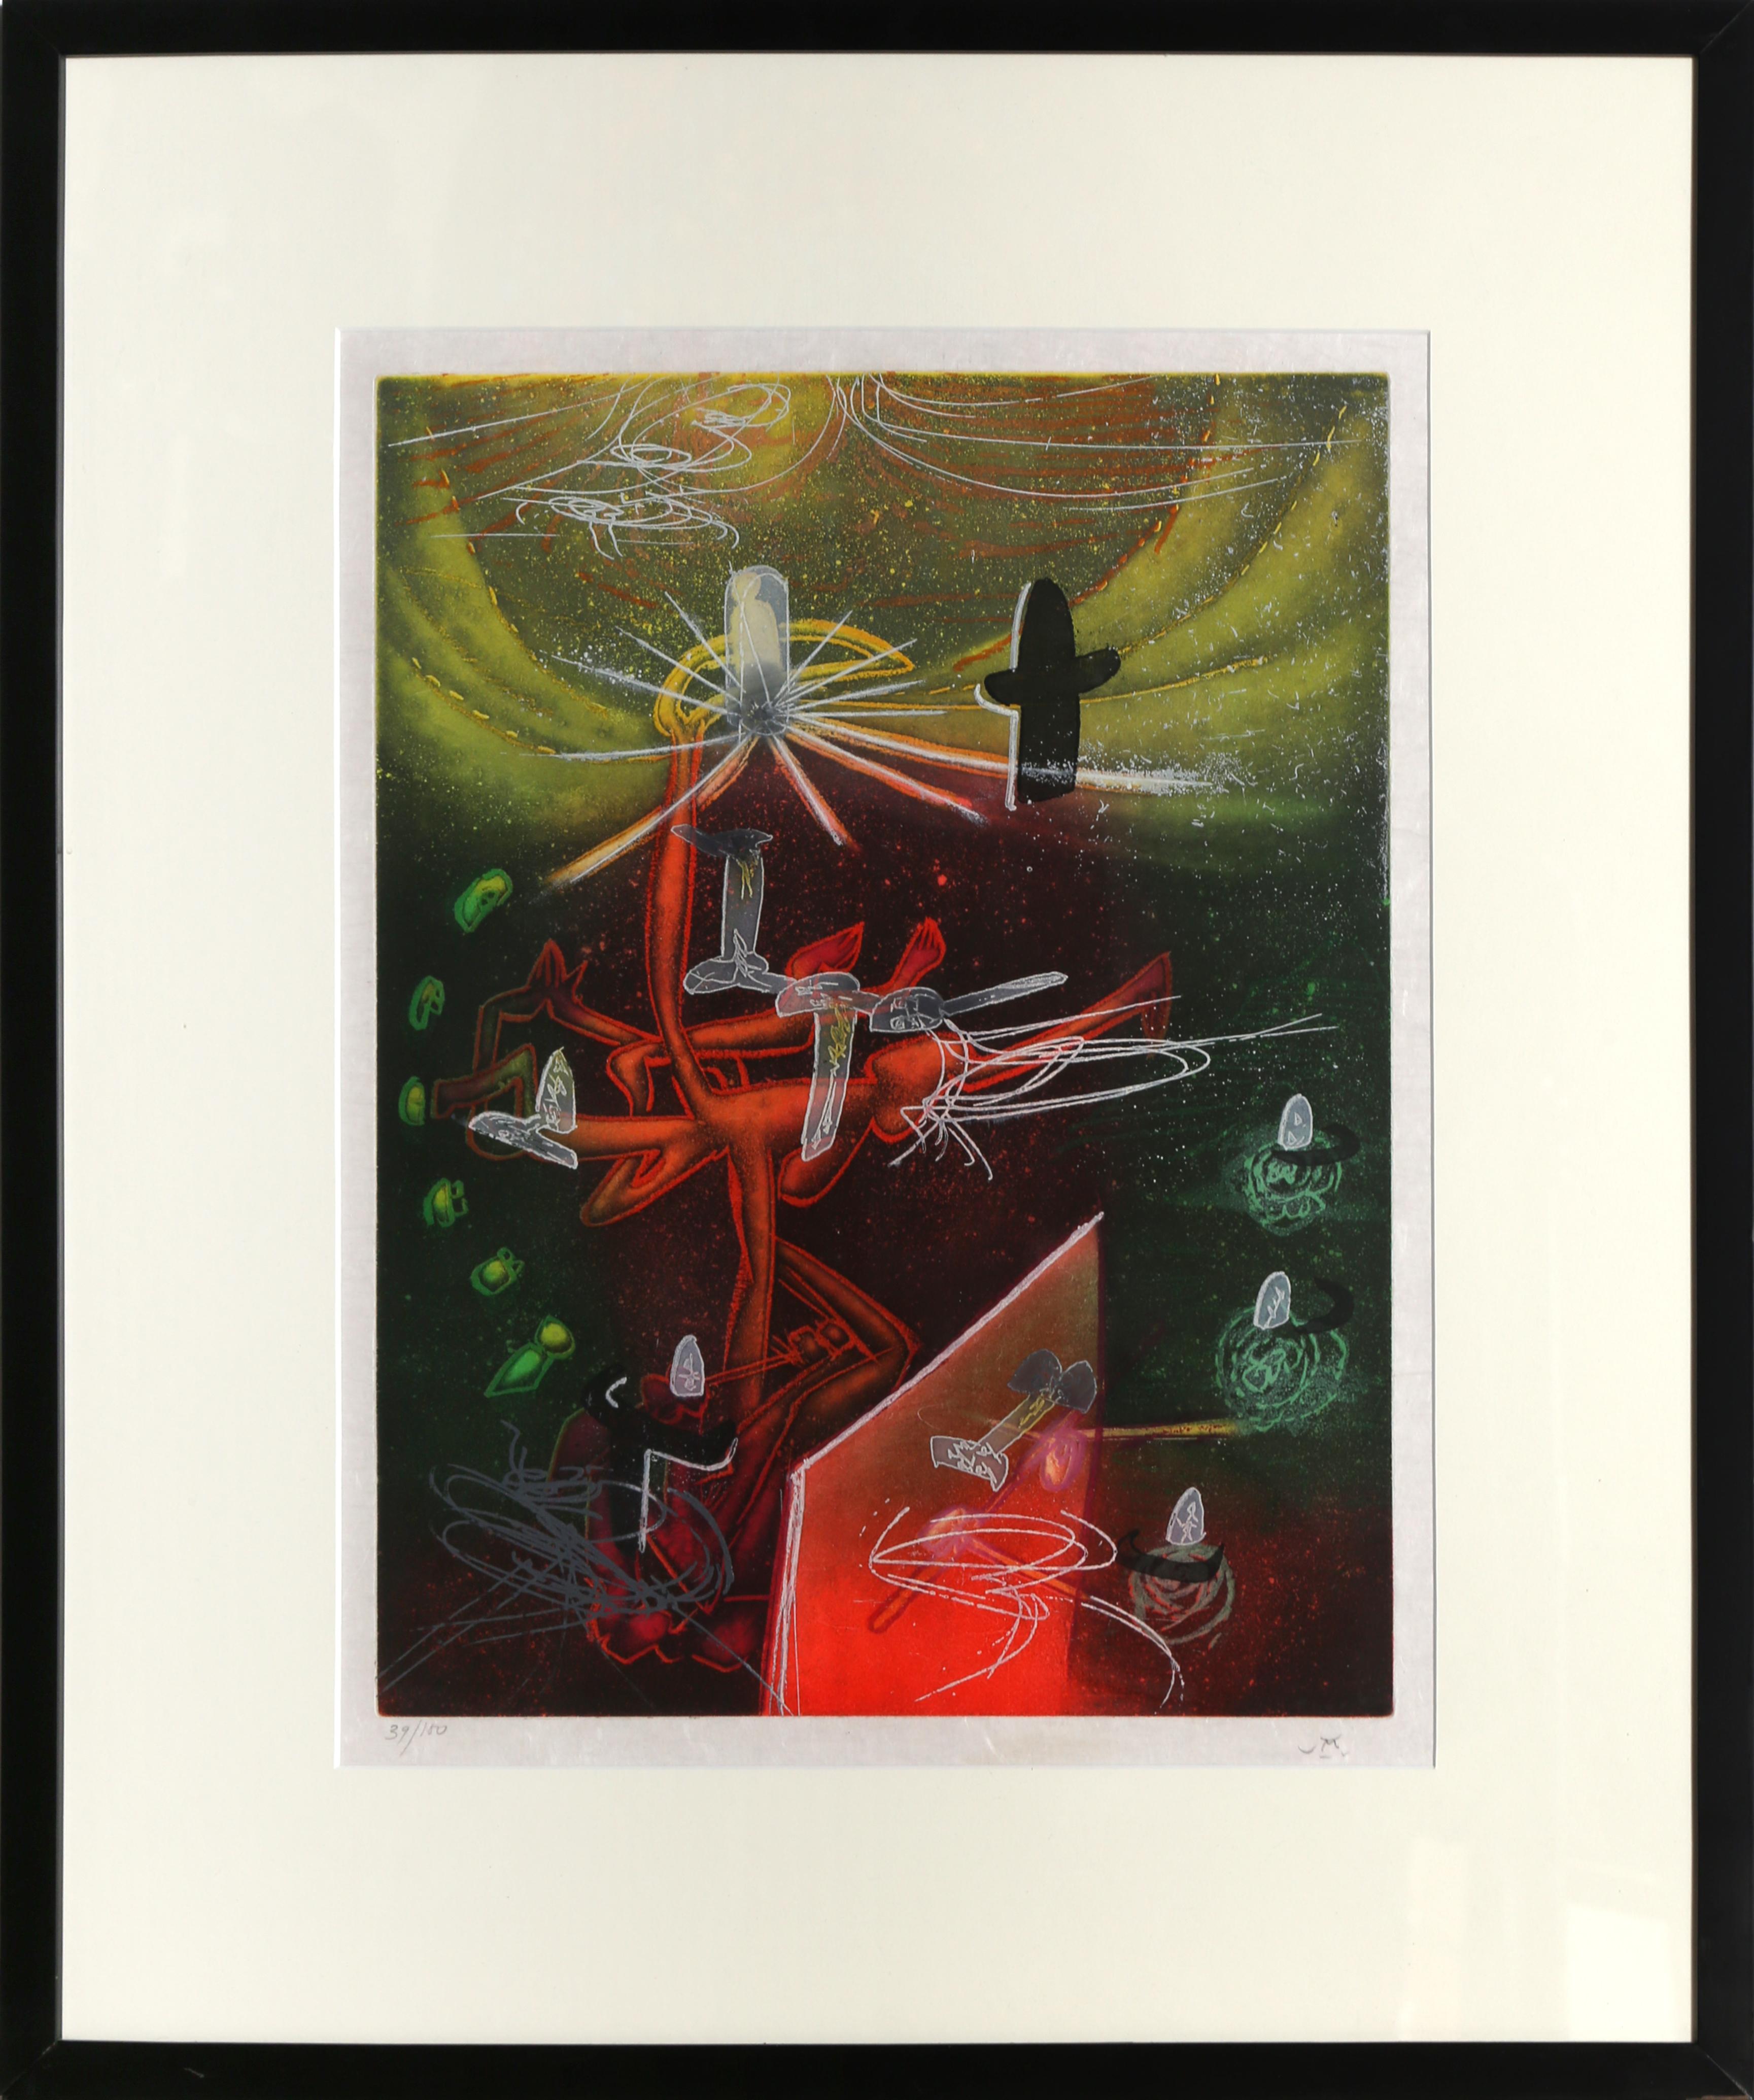 Surrealist Etching by Chilean artist Roberto Matta, from his series ”Une Saison En Enfer” (A Season in Hell), the famed poem by French poet Arthur Rimbaud. Signed and numbered in pencil.

Je Fixe des Vertiges
Roberto Matta, Chilean